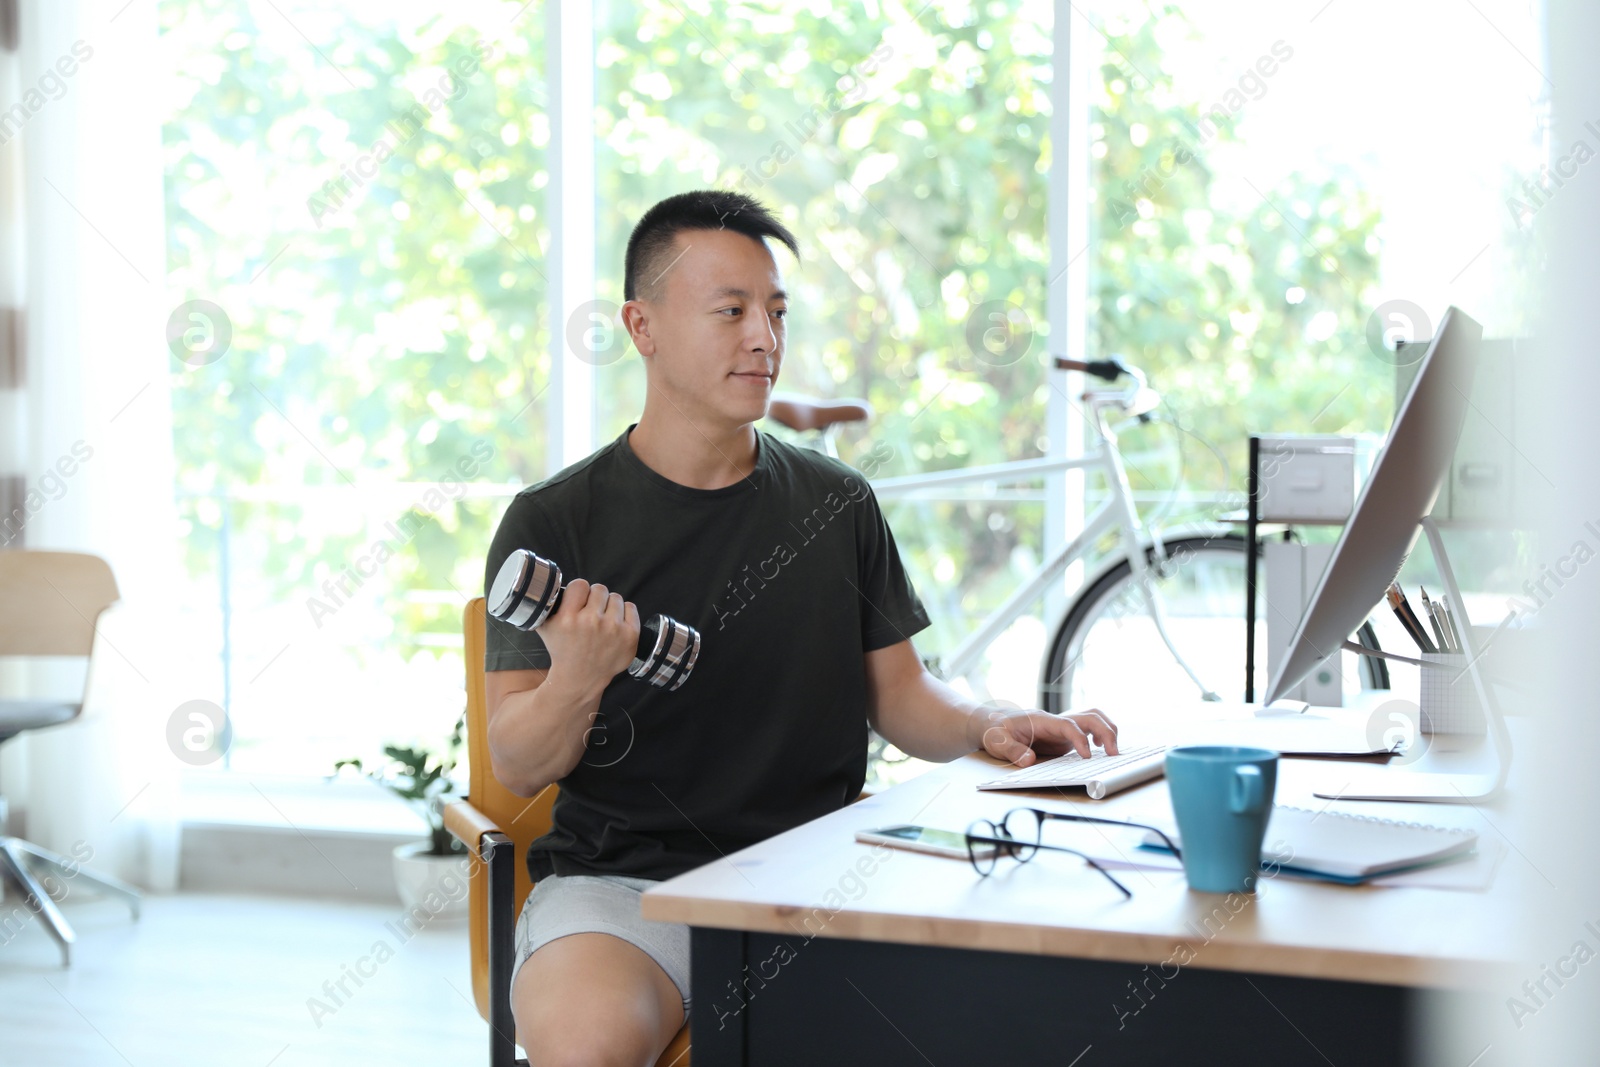 Photo of Young man lifting weights and using computer in office. Workplace fitness